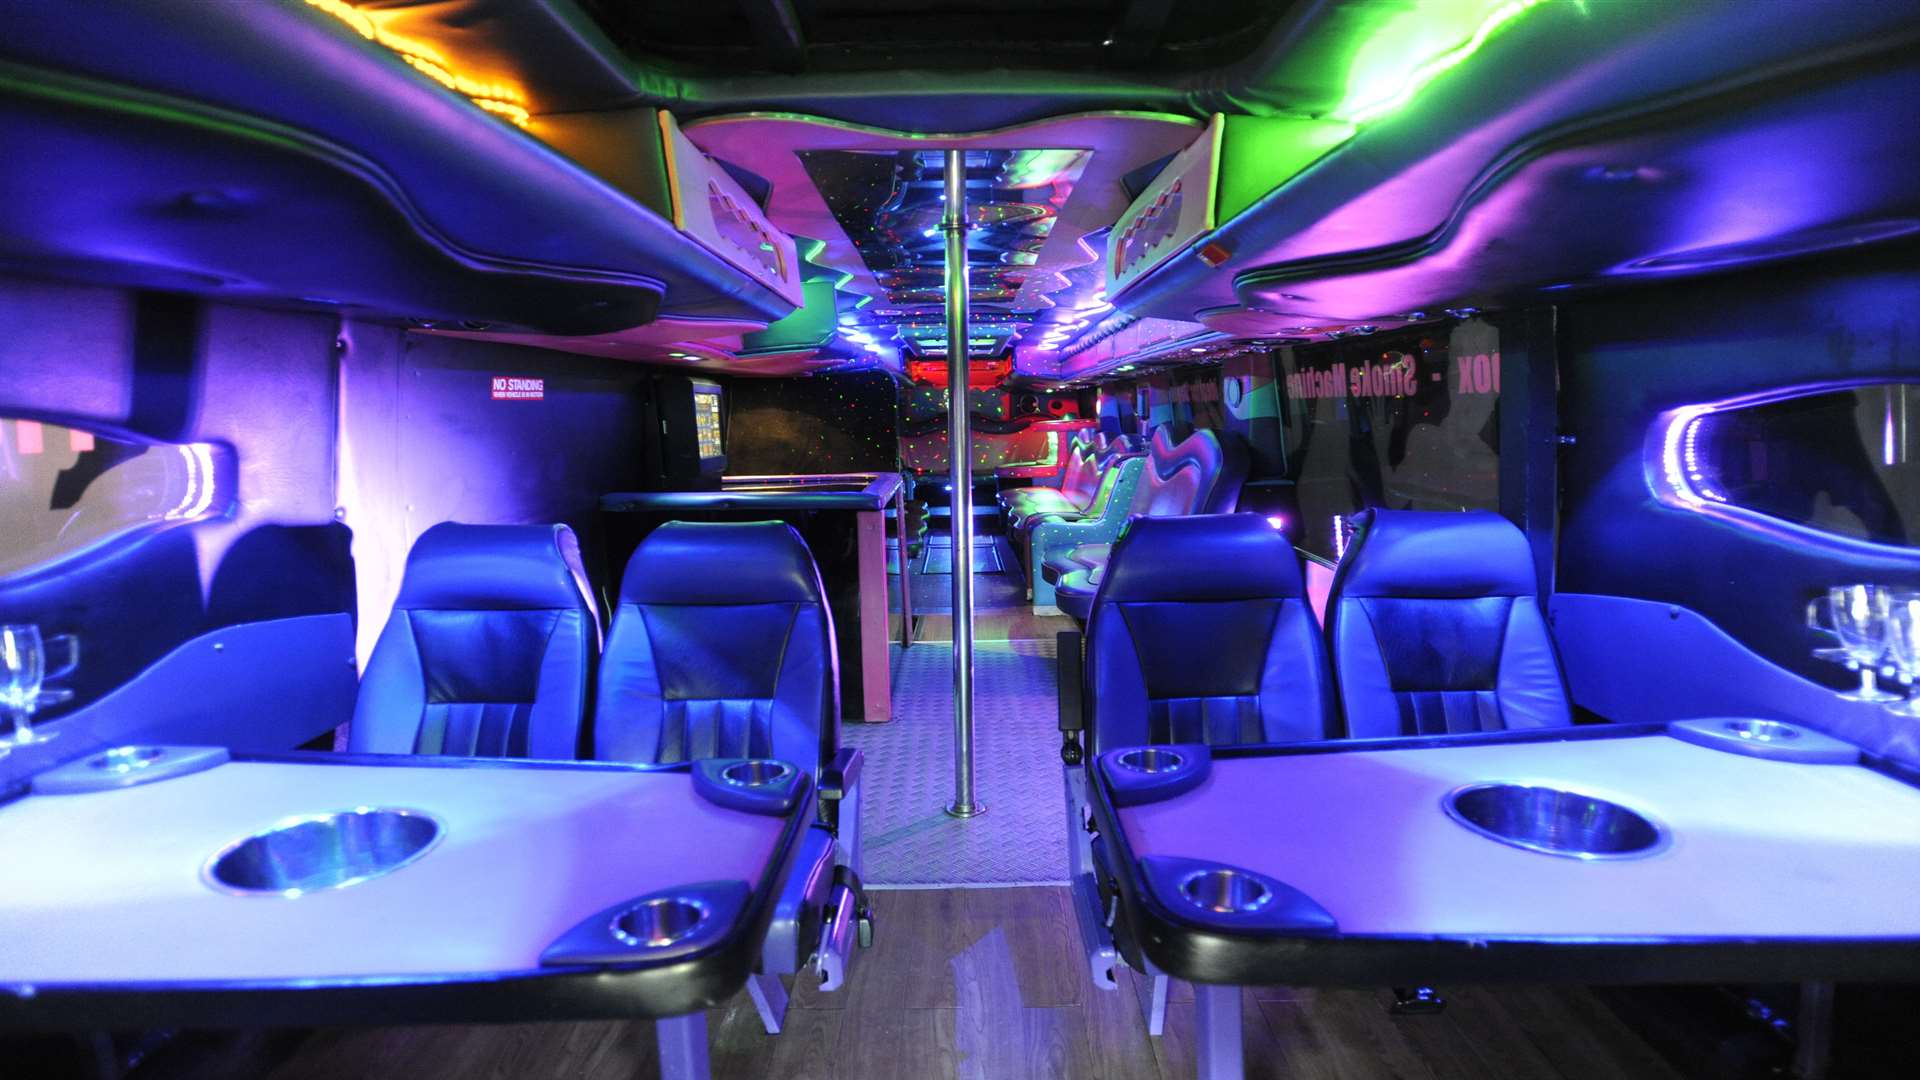 Inside the party bus